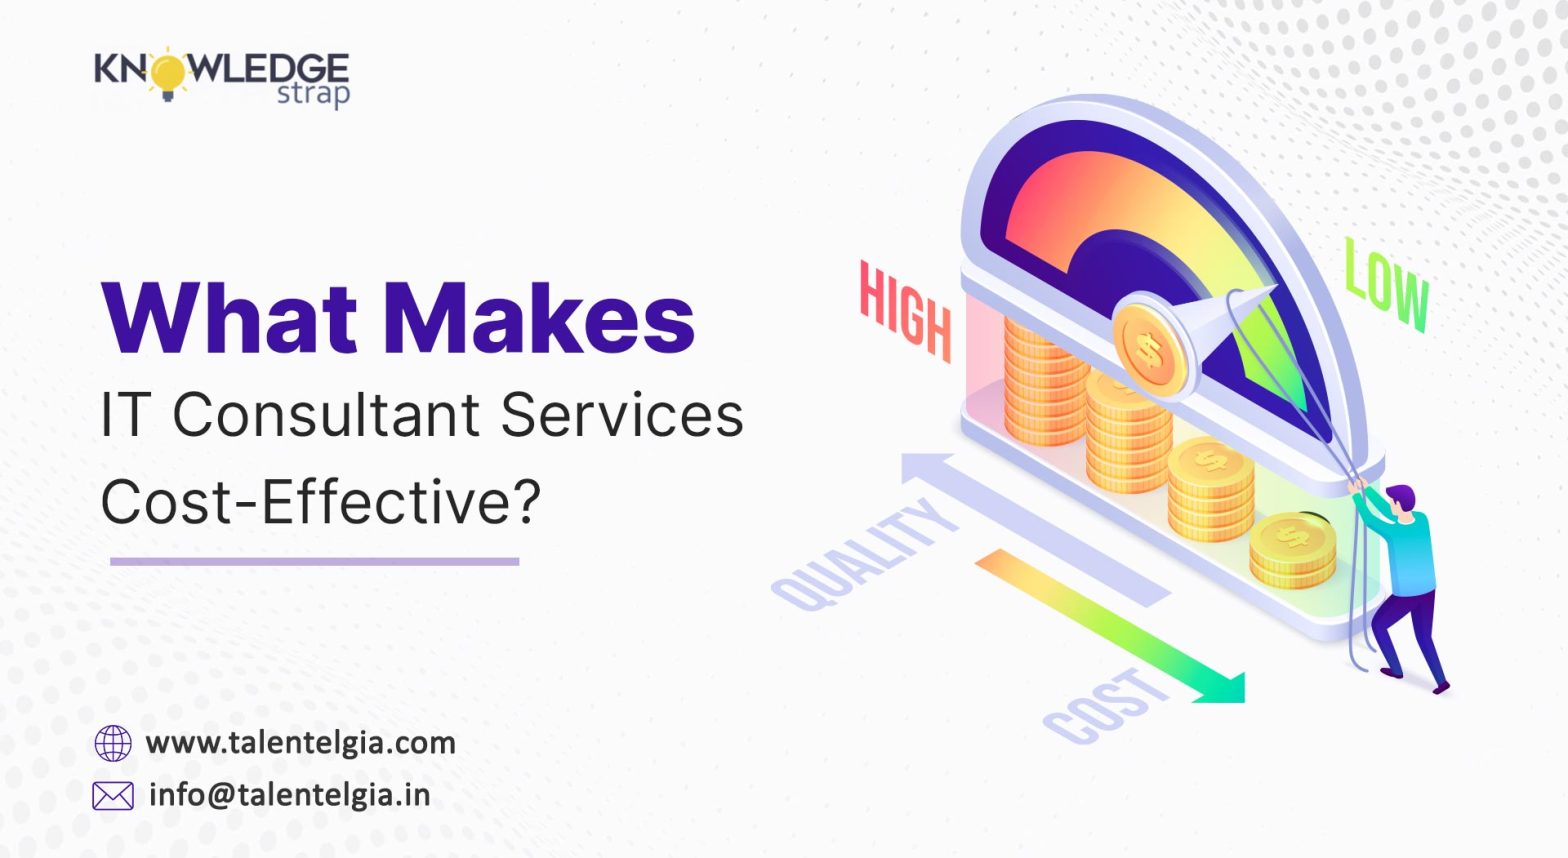 What Makes IT Consultant Services Cost-Effective